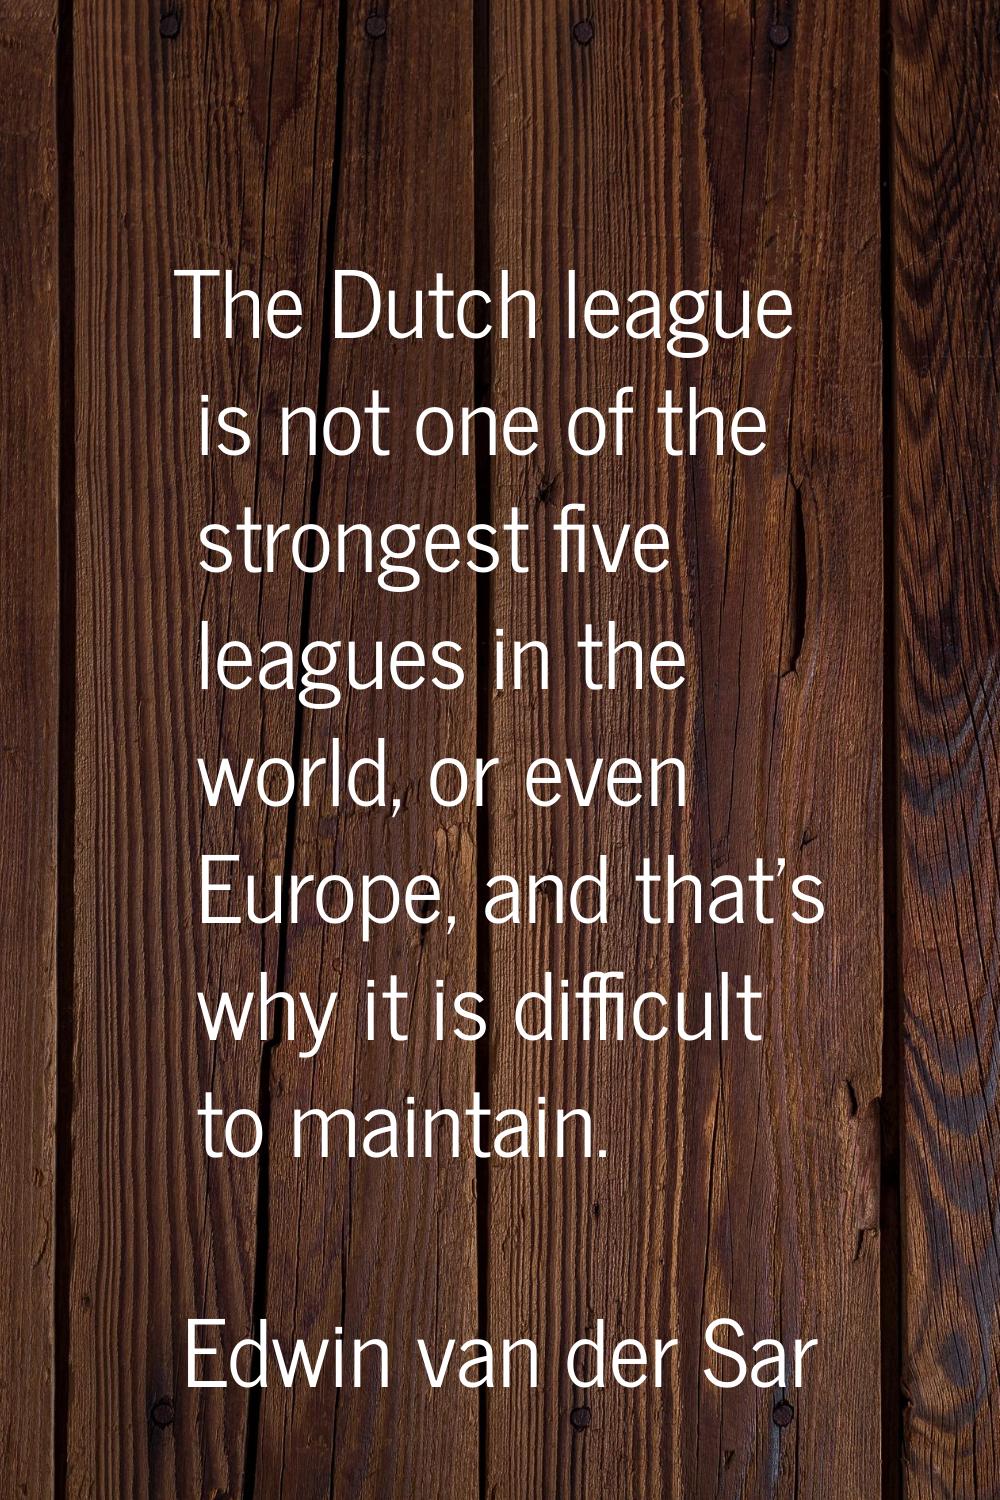 The Dutch league is not one of the strongest five leagues in the world, or even Europe, and that's 